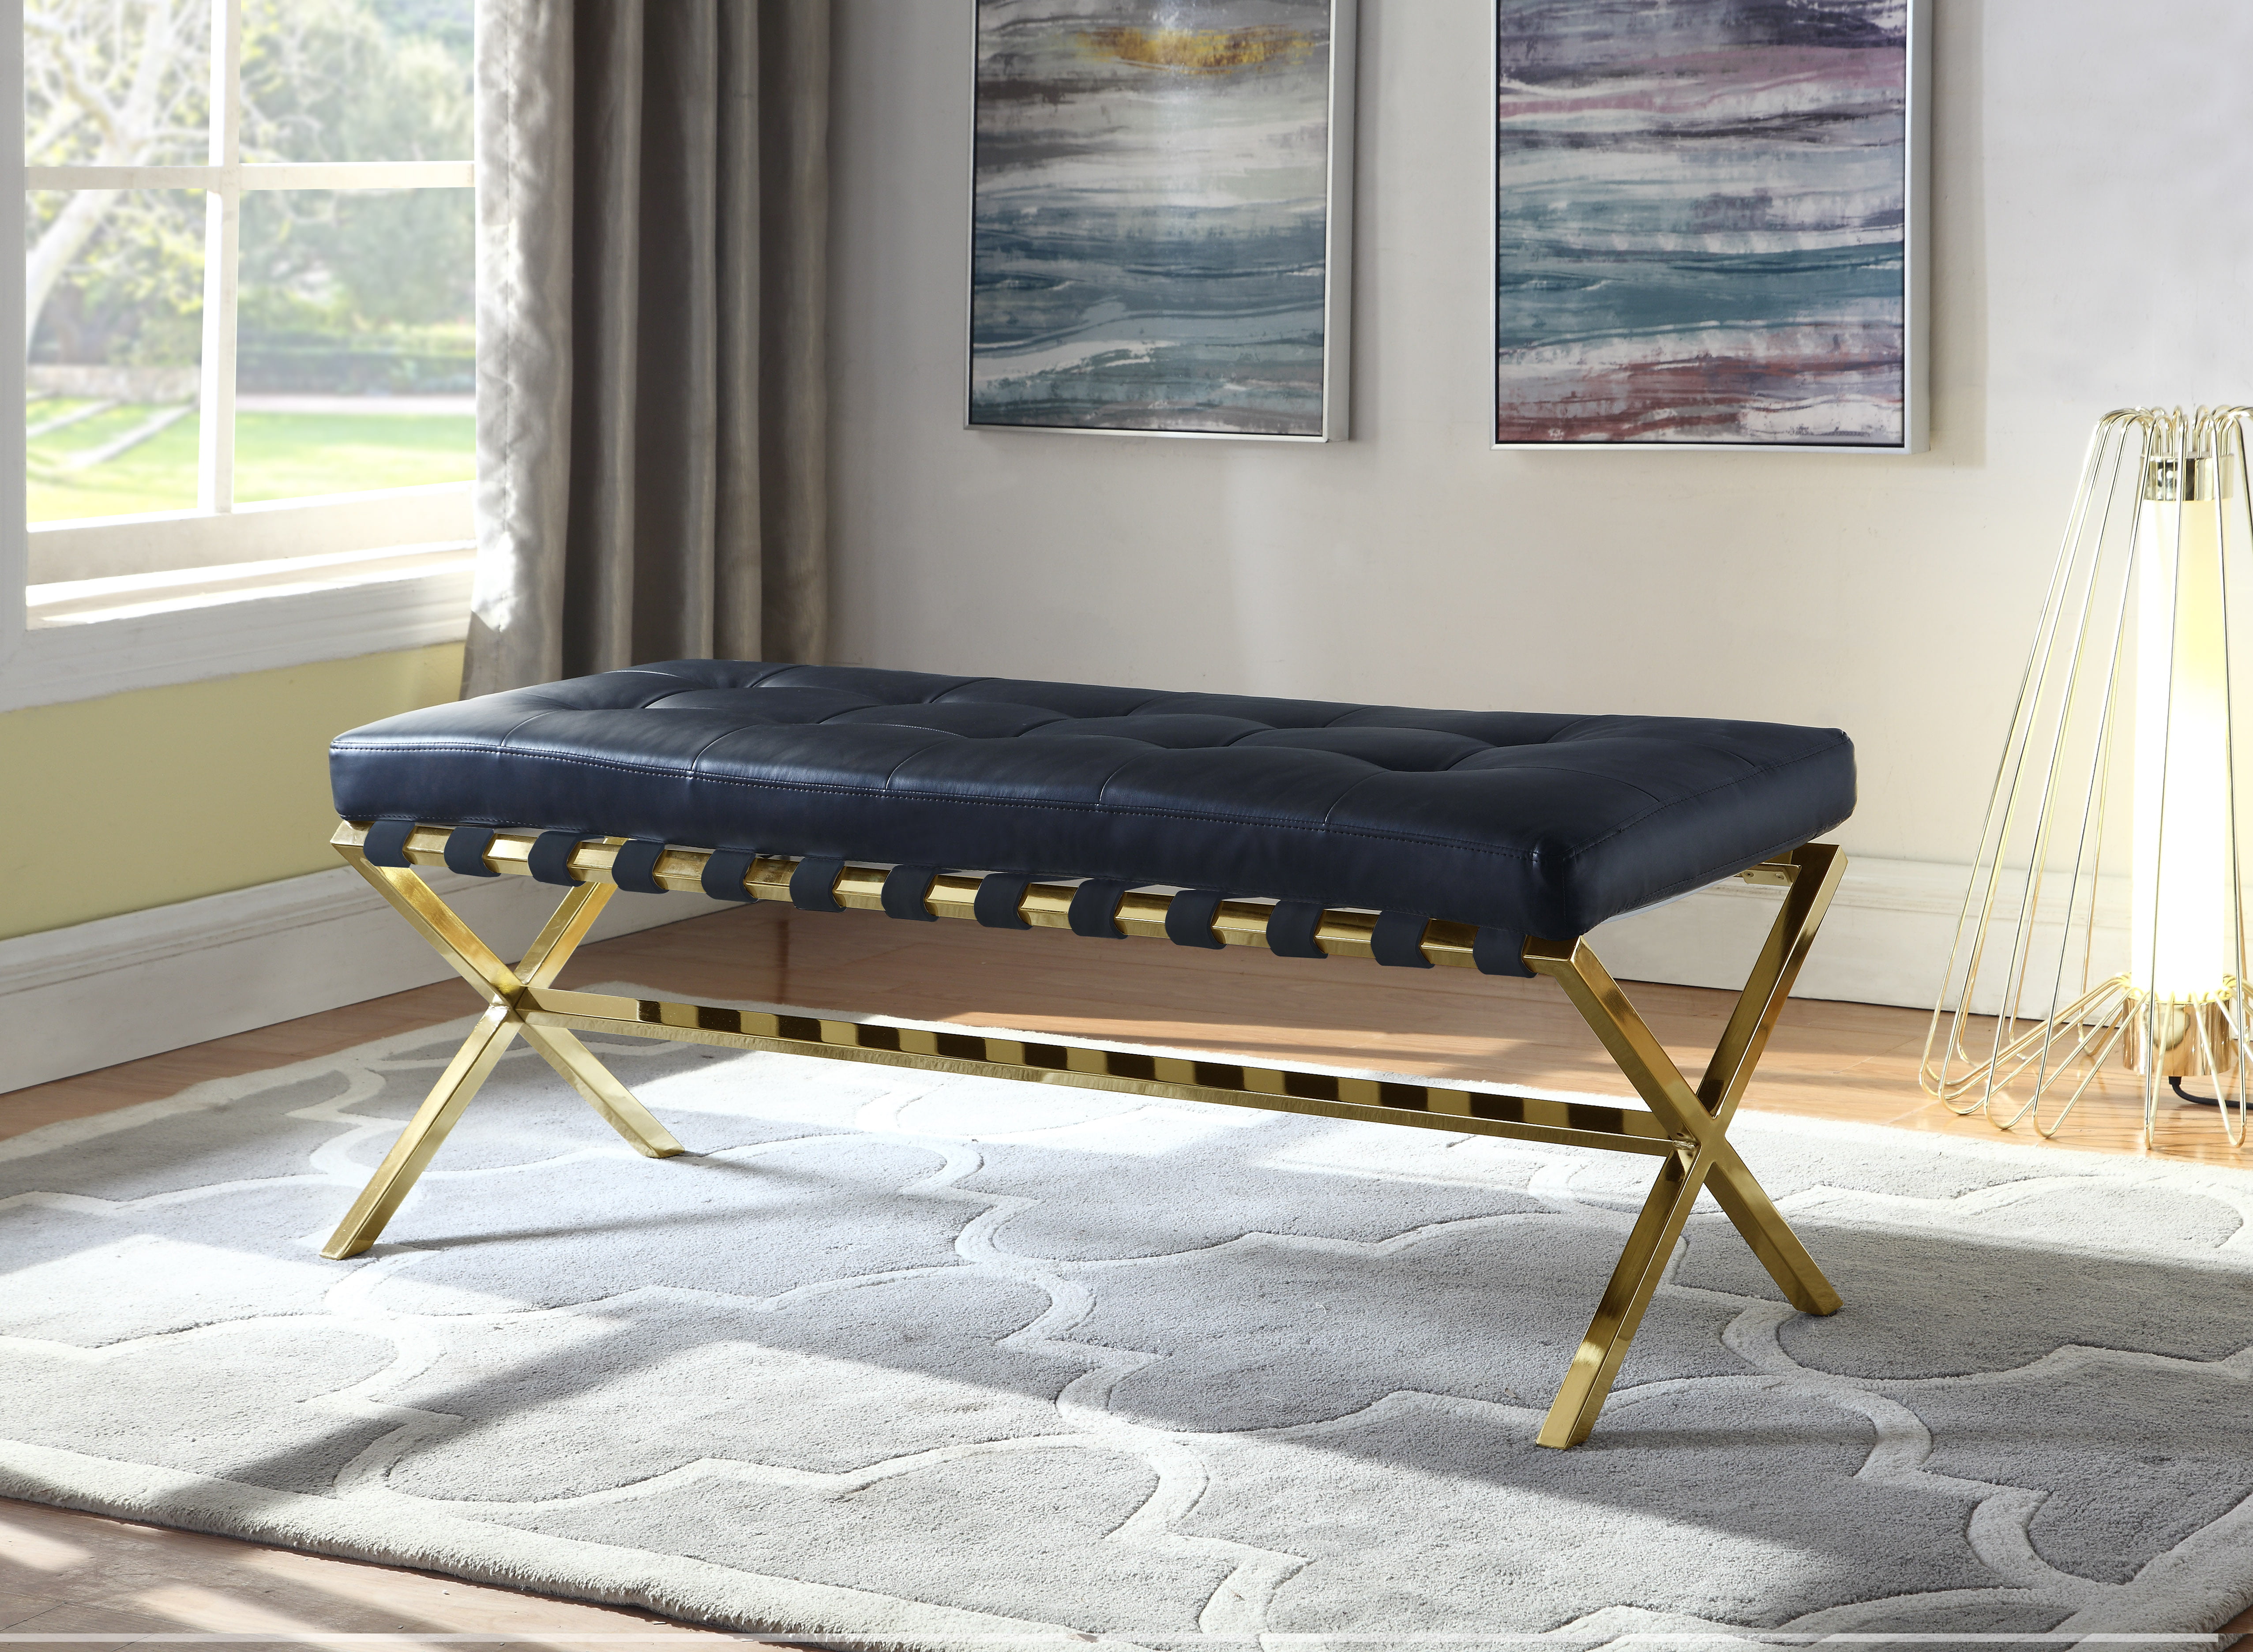 Picture of Luxury Bedding FBH2631 Chic Home Perez PU Leather Modern Contemporary Tufted Seating Goldtone Metal Leg Bench - Black